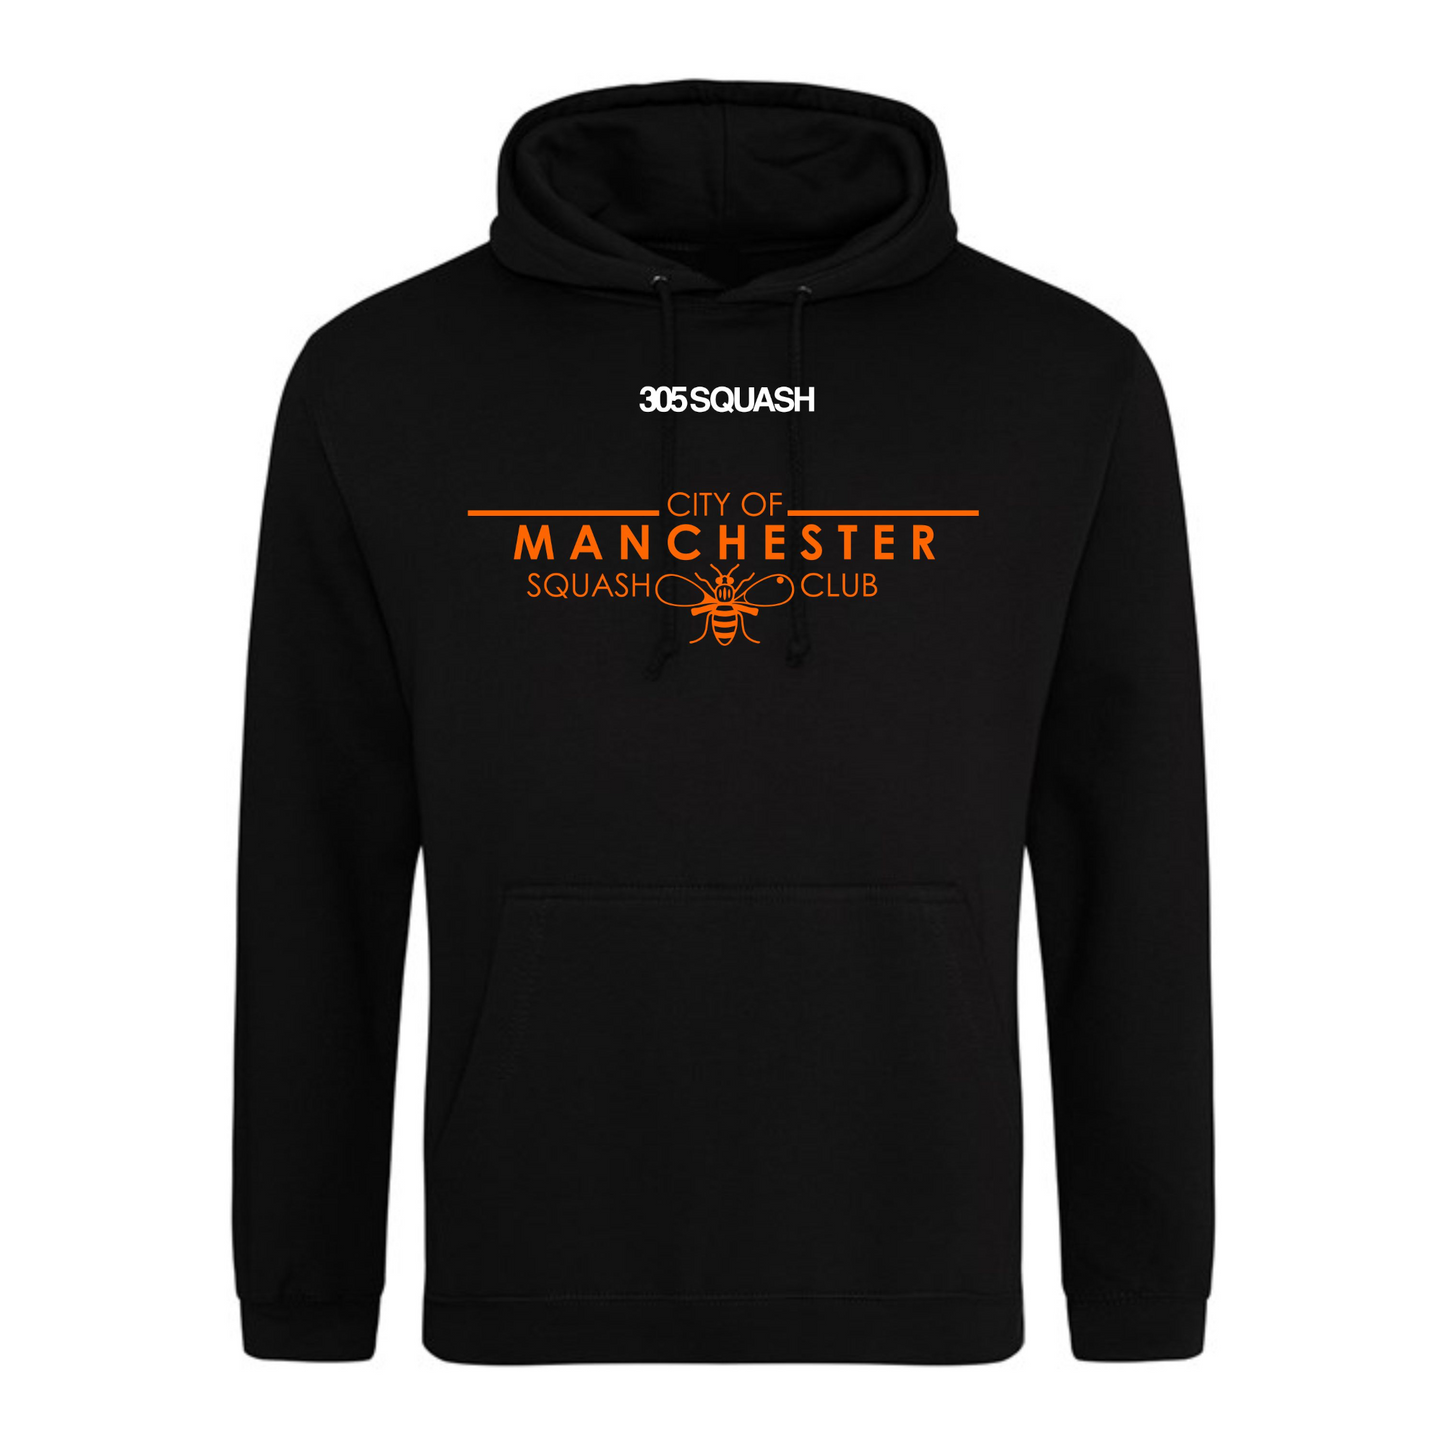 City of Manchester Squash Classic Womens Hoody